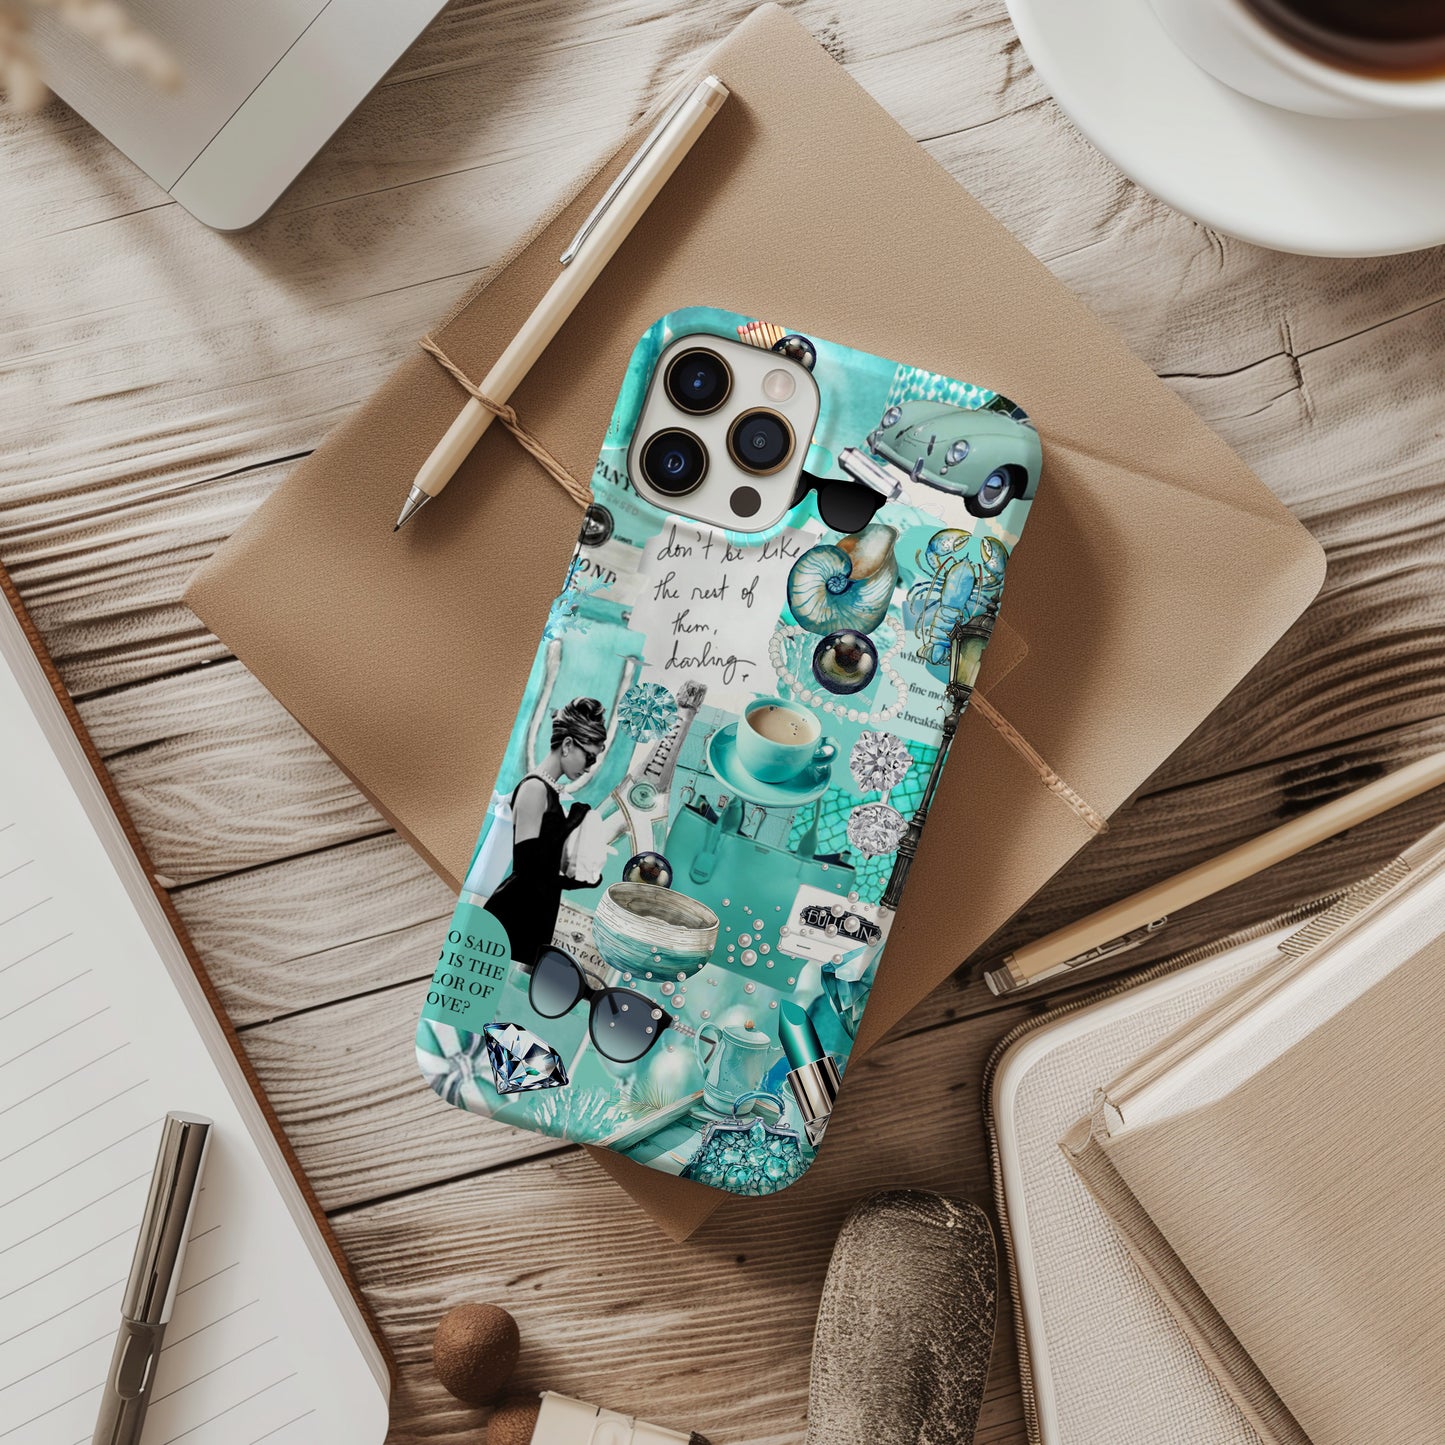 Desk view of Tiffany Blue Collage Phone Case. Breakfast at Tiffany's iconic phone case by Artscape Market